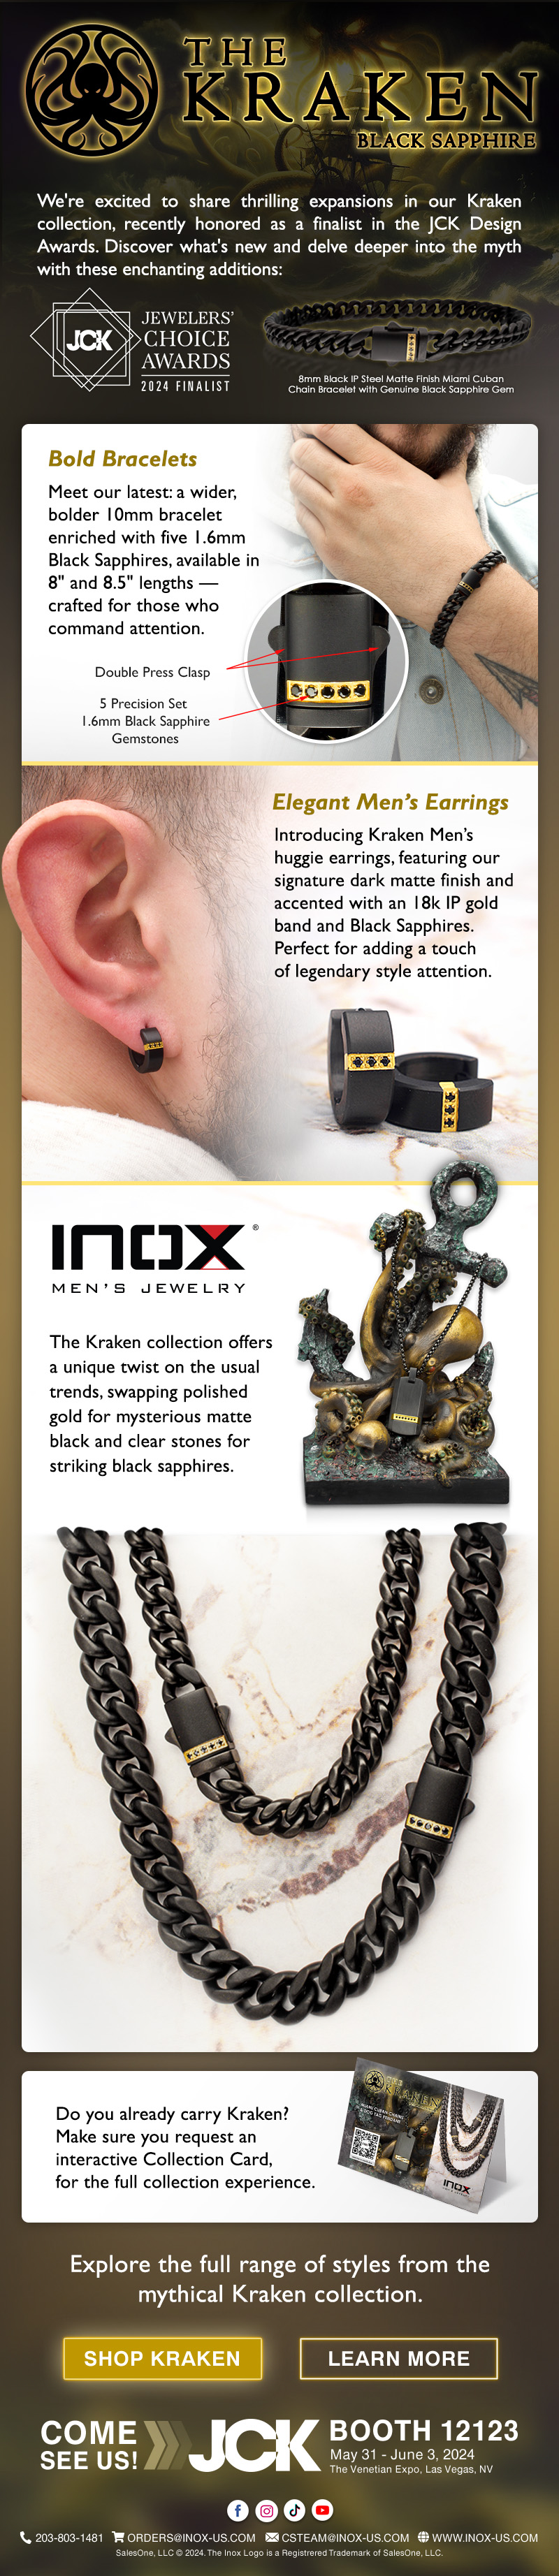 New Mythical Additions to Our Award-Finalist Kraken Collection